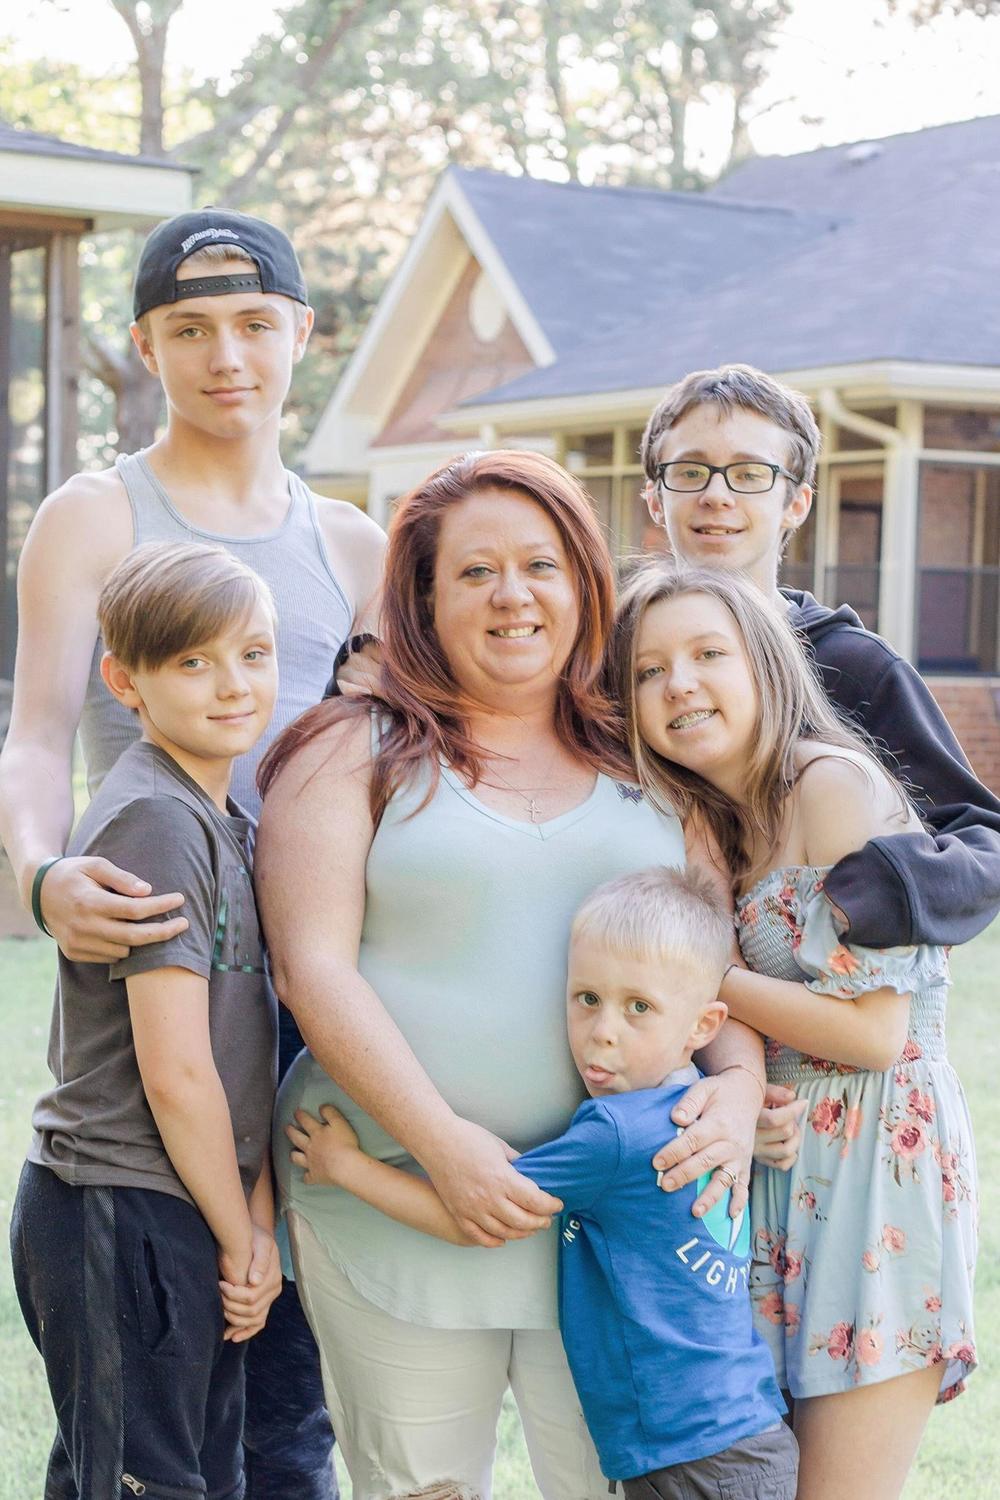 Stephanie Osterhout (center) with her children: (left to right) Sammy, 12, Jeremy, 14, Jay, 15, Alexis, 13, and Grayson, 5.